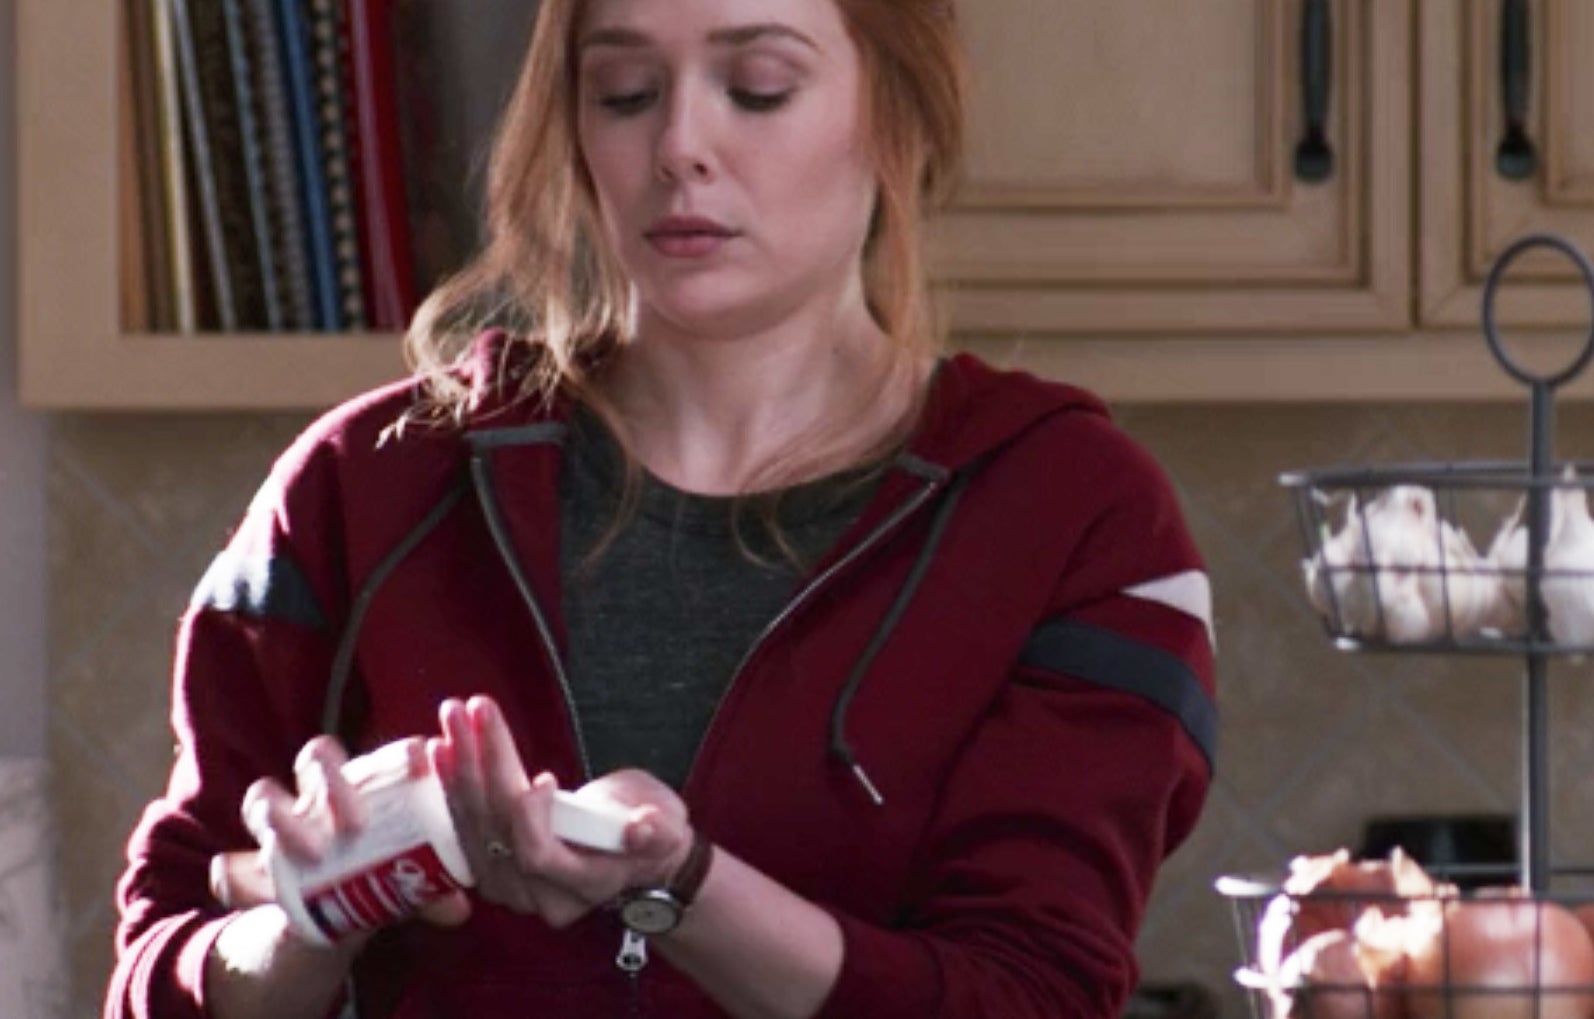 Wanda pouring a pill from a bottle into her hand